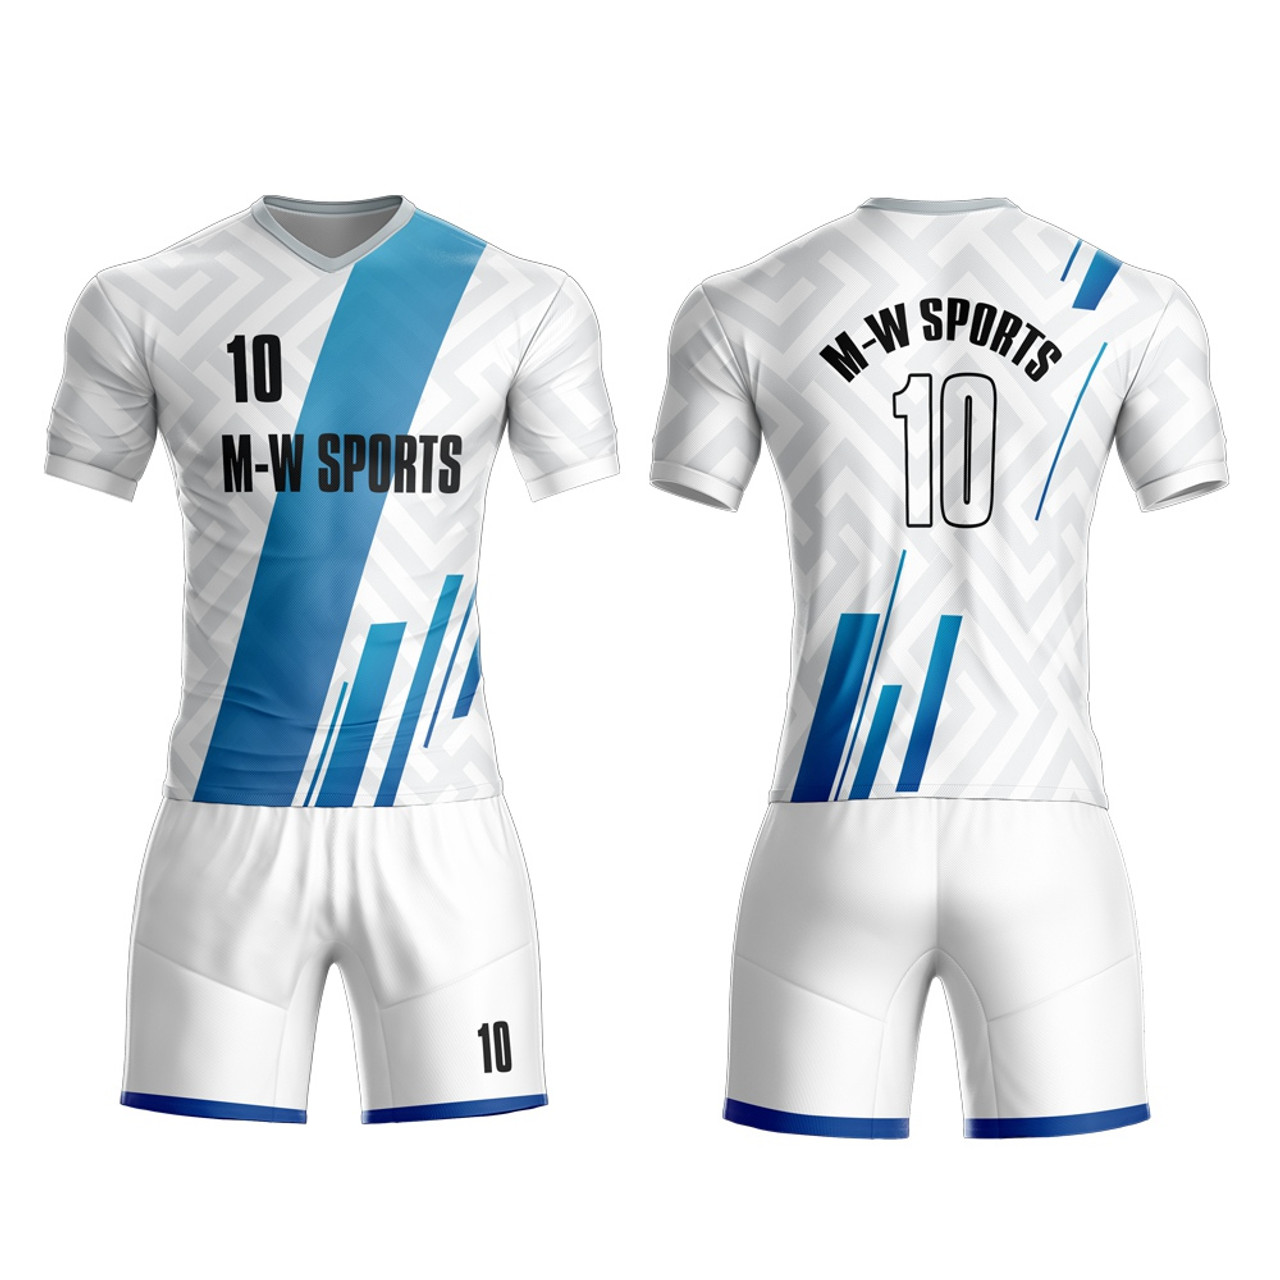 soccer numbers jersey